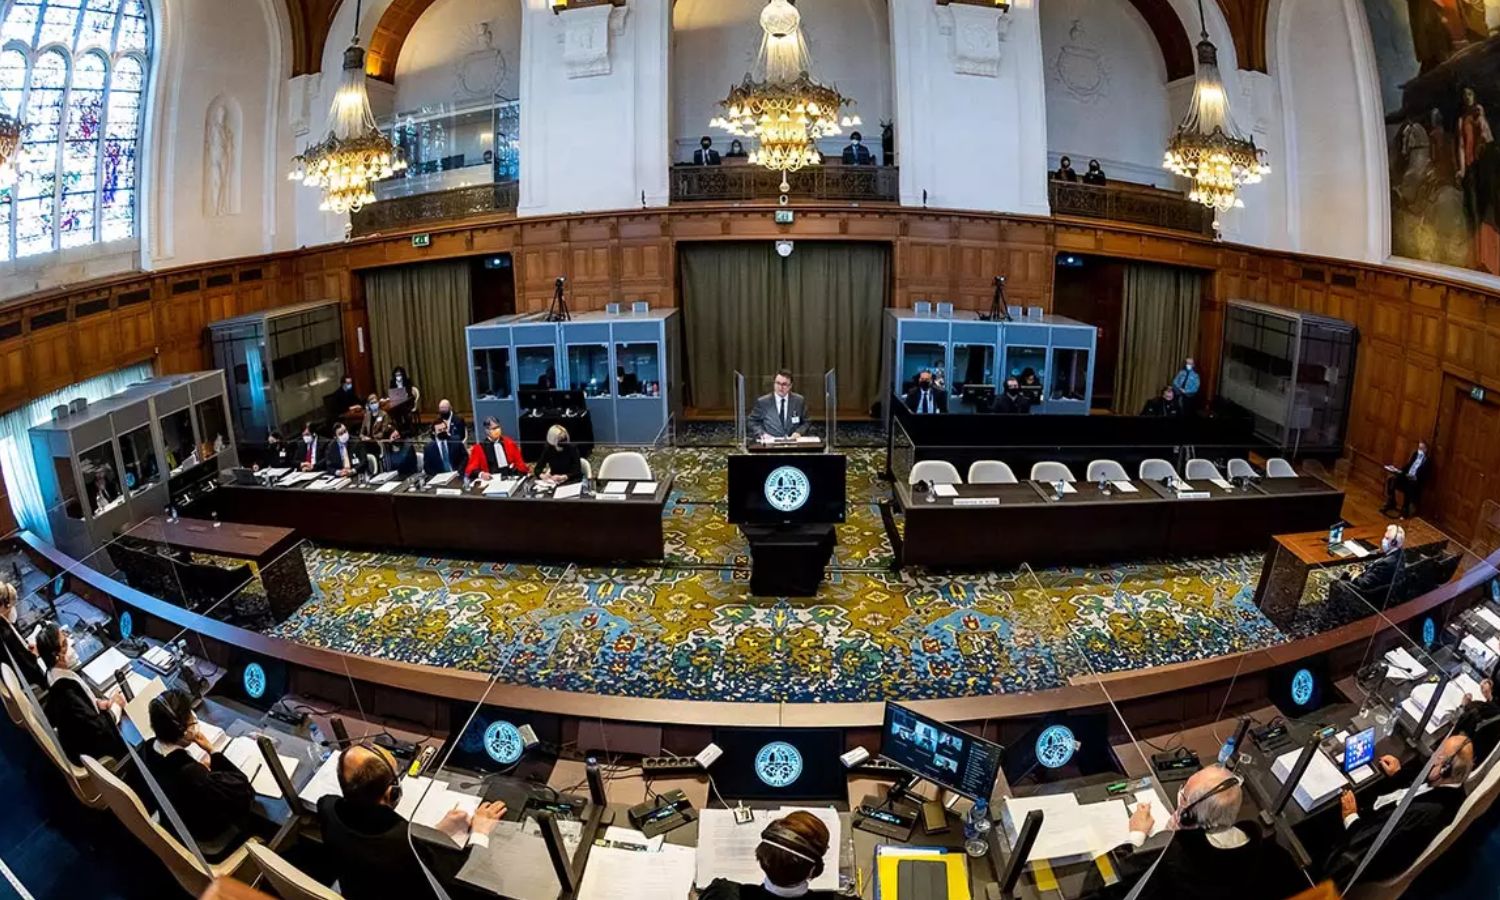 An emergency oral discussion held by the International Court of Justice based on Ukraine’s requests after the Russian military intervention - March 2022 (CIJ_ICJ)